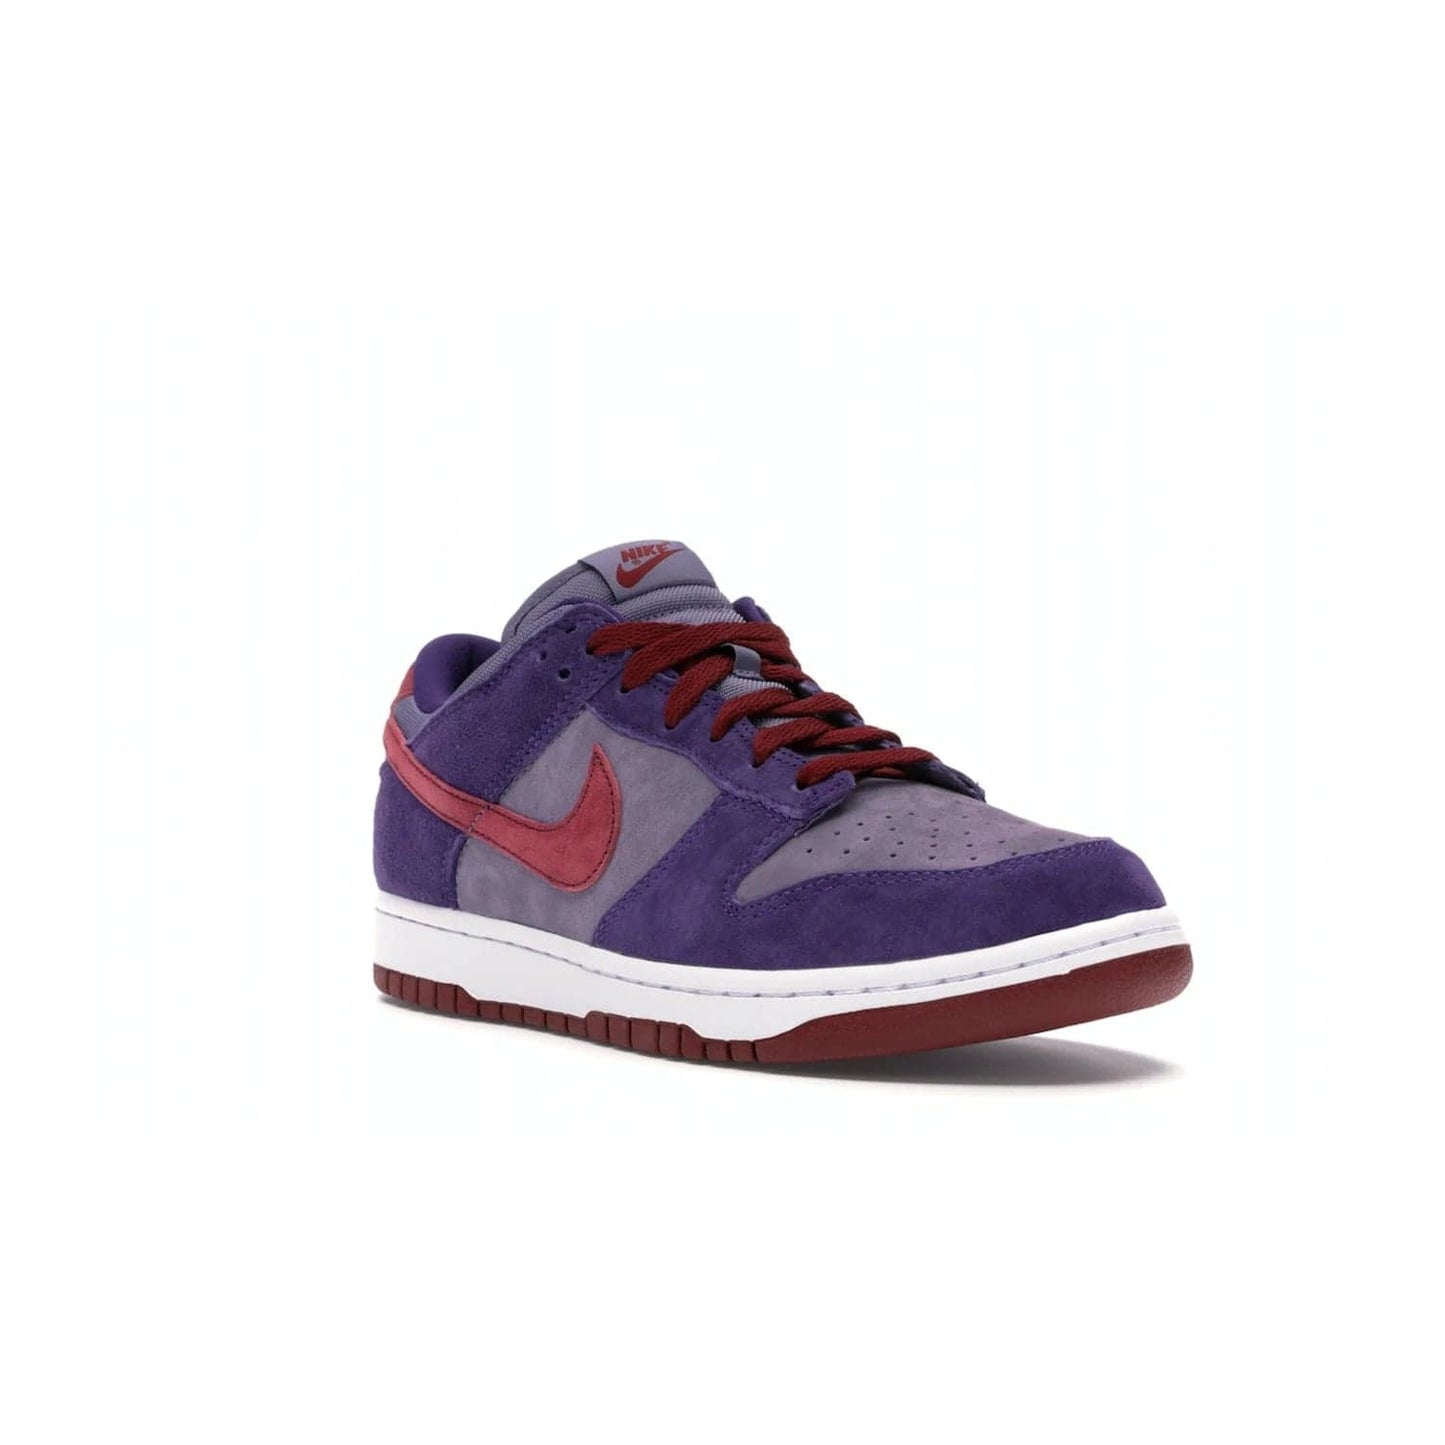 Nike Dunk Low Plum (2020) - Image 6 - Only at www.BallersClubKickz.com - Elevate your look with the Nike Dunk Low Plum (2020). Featuring a bold purple colorway, this retro-inspired silhouette is constructed of premium suede and makes for a must-have for any sneakerhead.